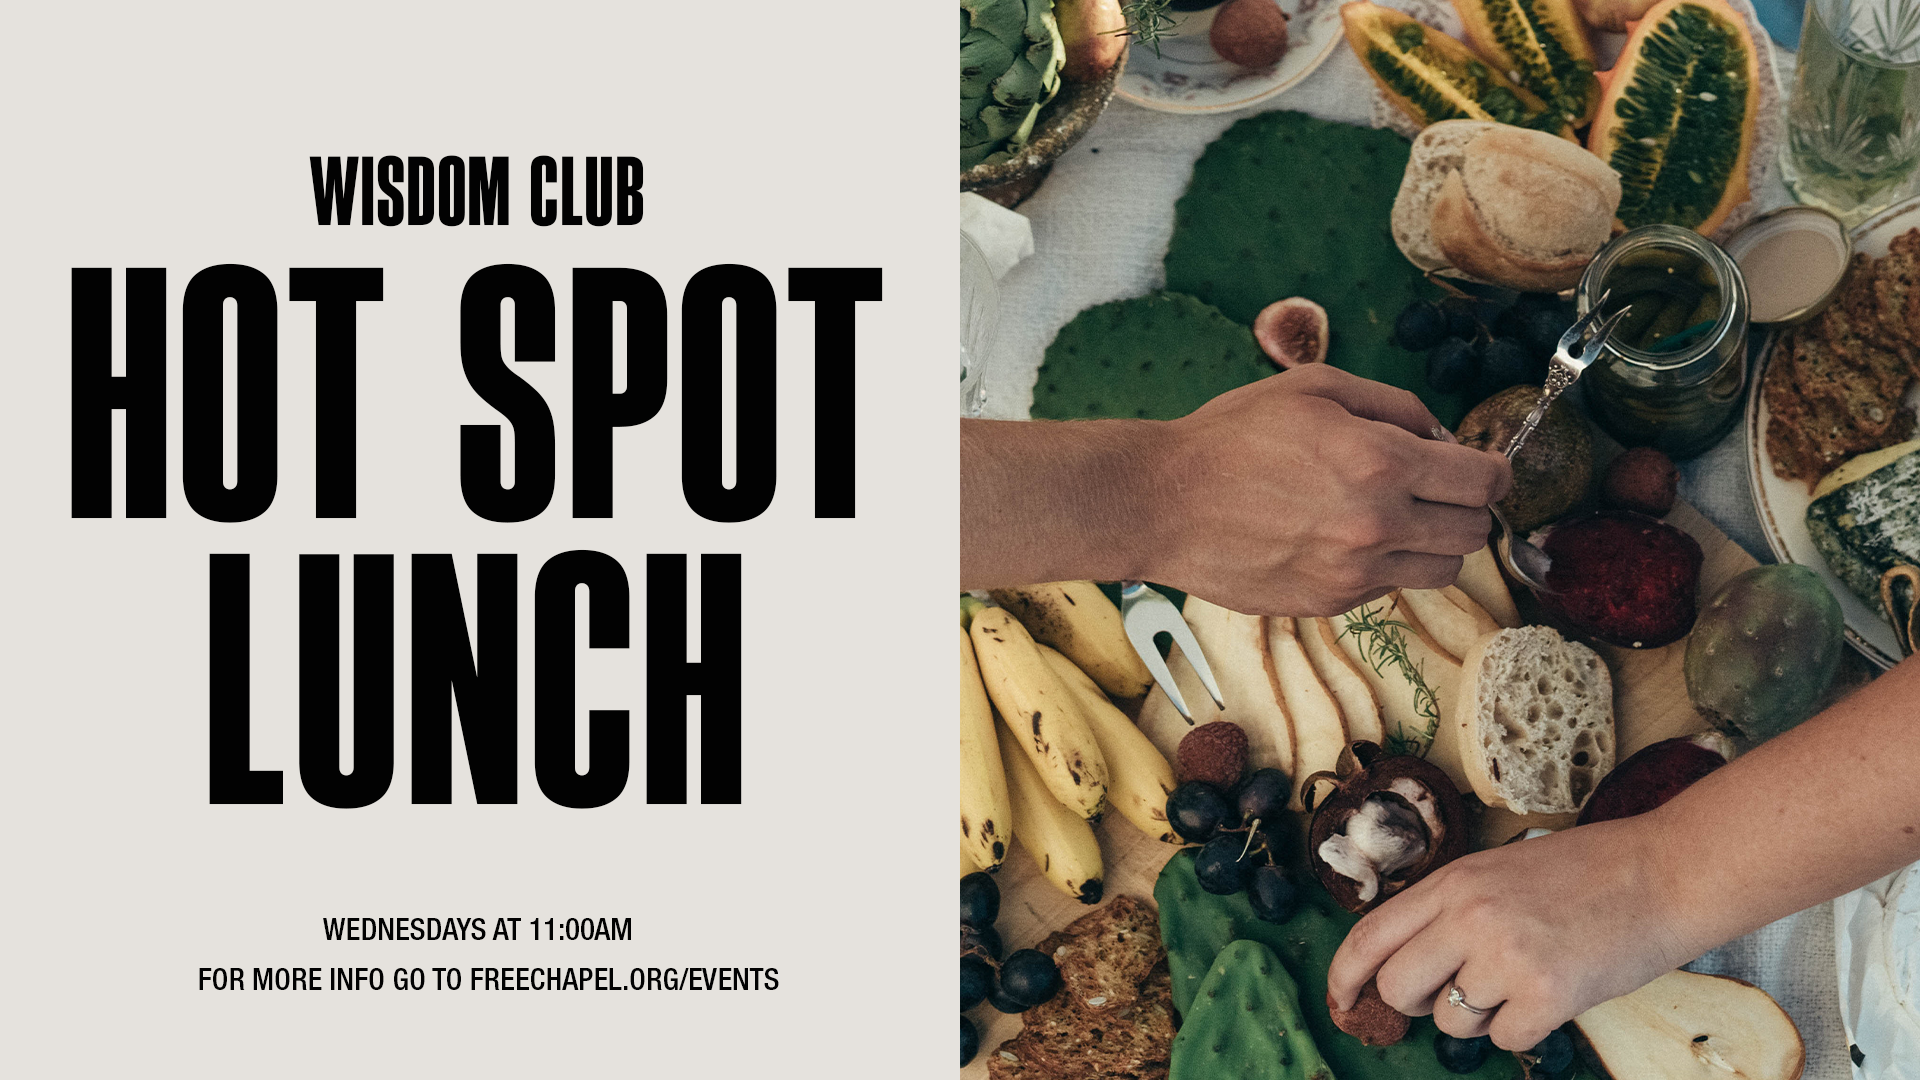 Wisdom Club: Hot Spot Lunch at the Gainesville campus